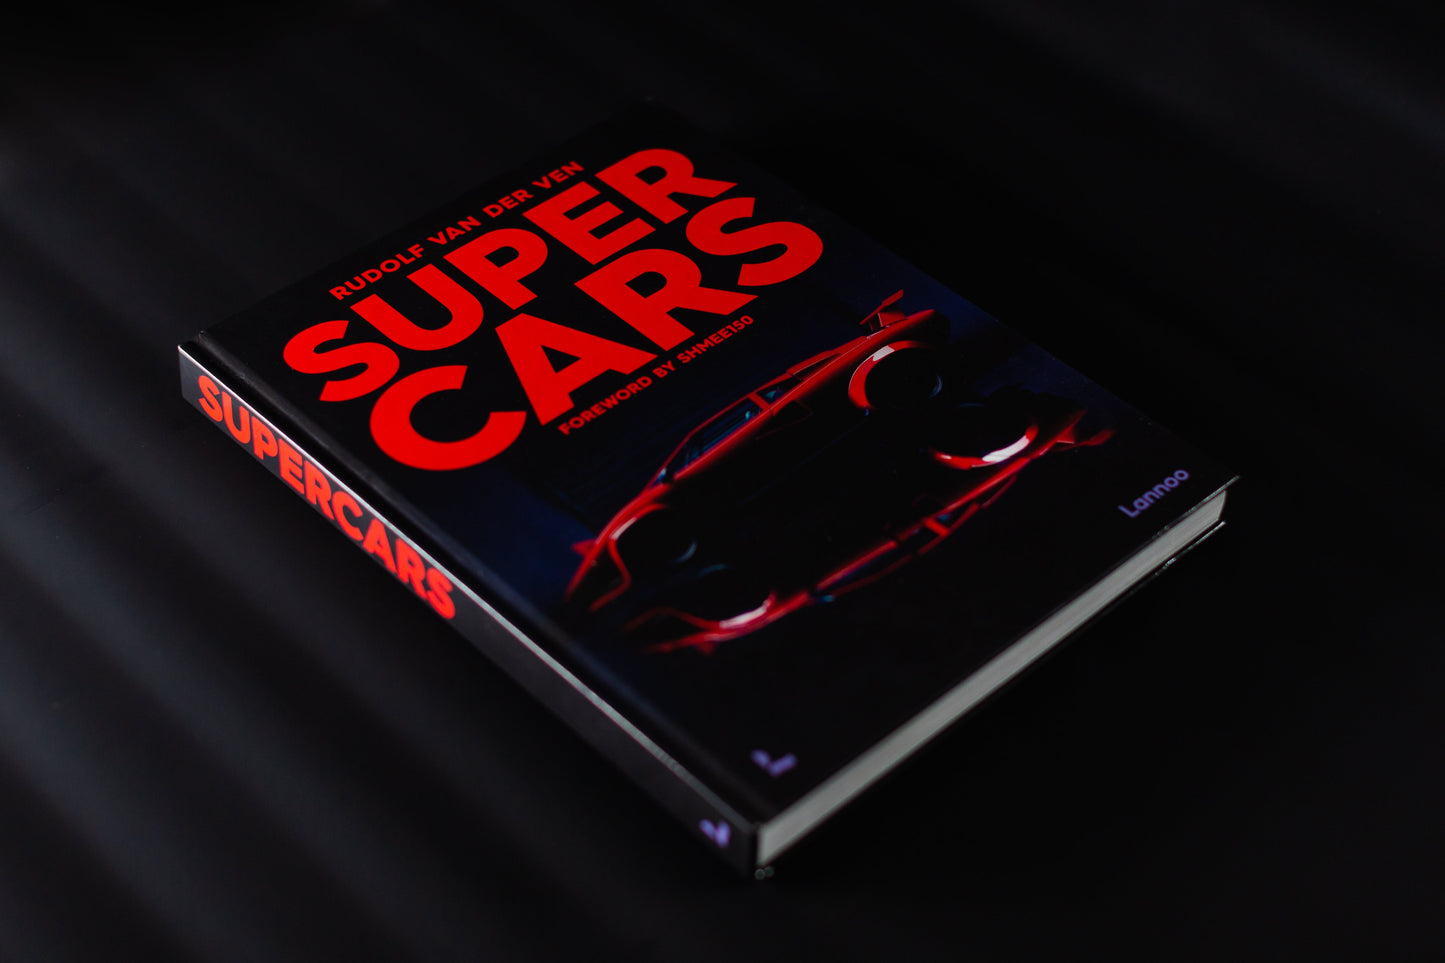 Supercars One-of-One Owners' Edition - McLaren P1 (pre-order)